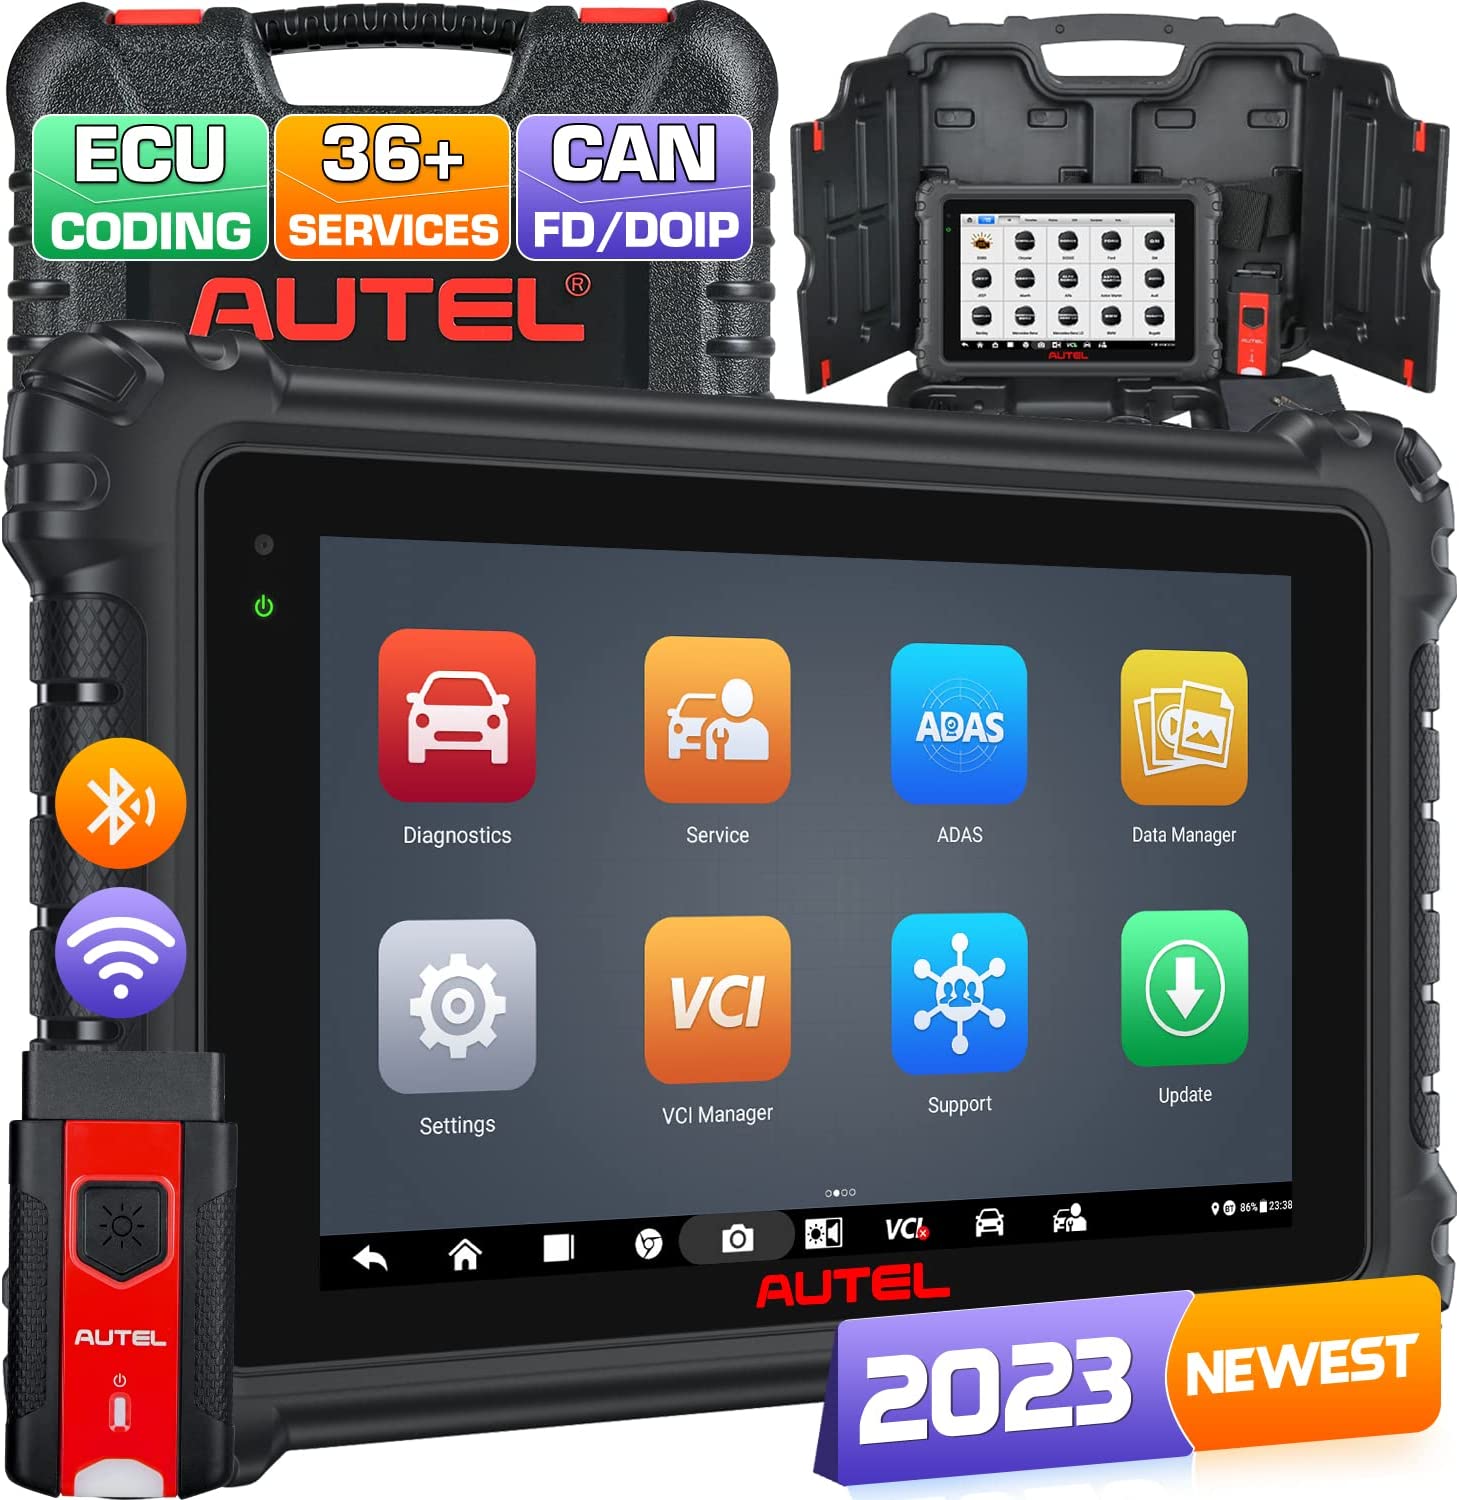 Autel MaxiSys MS906 Pro Car Diagnostic Tool, Updated of MS906BT/ MK906BT/ MS906, ECU Coding, Bidirectional Control & Full Diagnose, 36+ Services